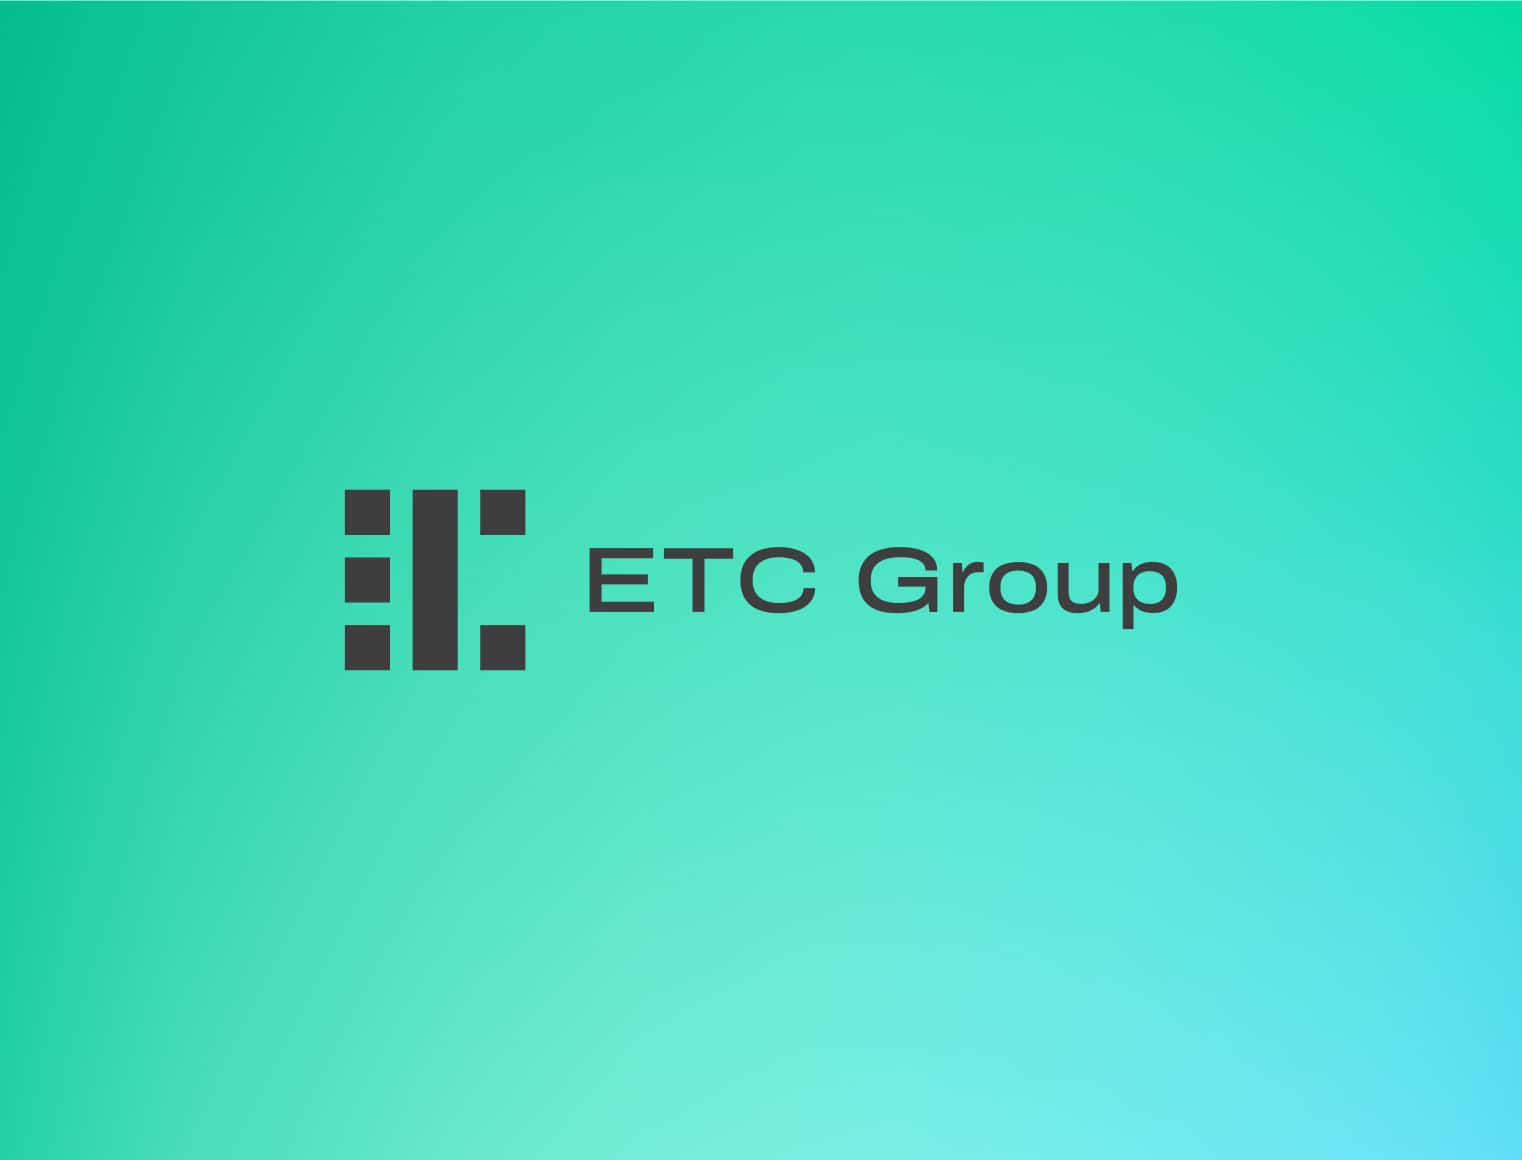 BTCE is Europe’s biggest winner as Bitcoin ETPs see $260m of inflows